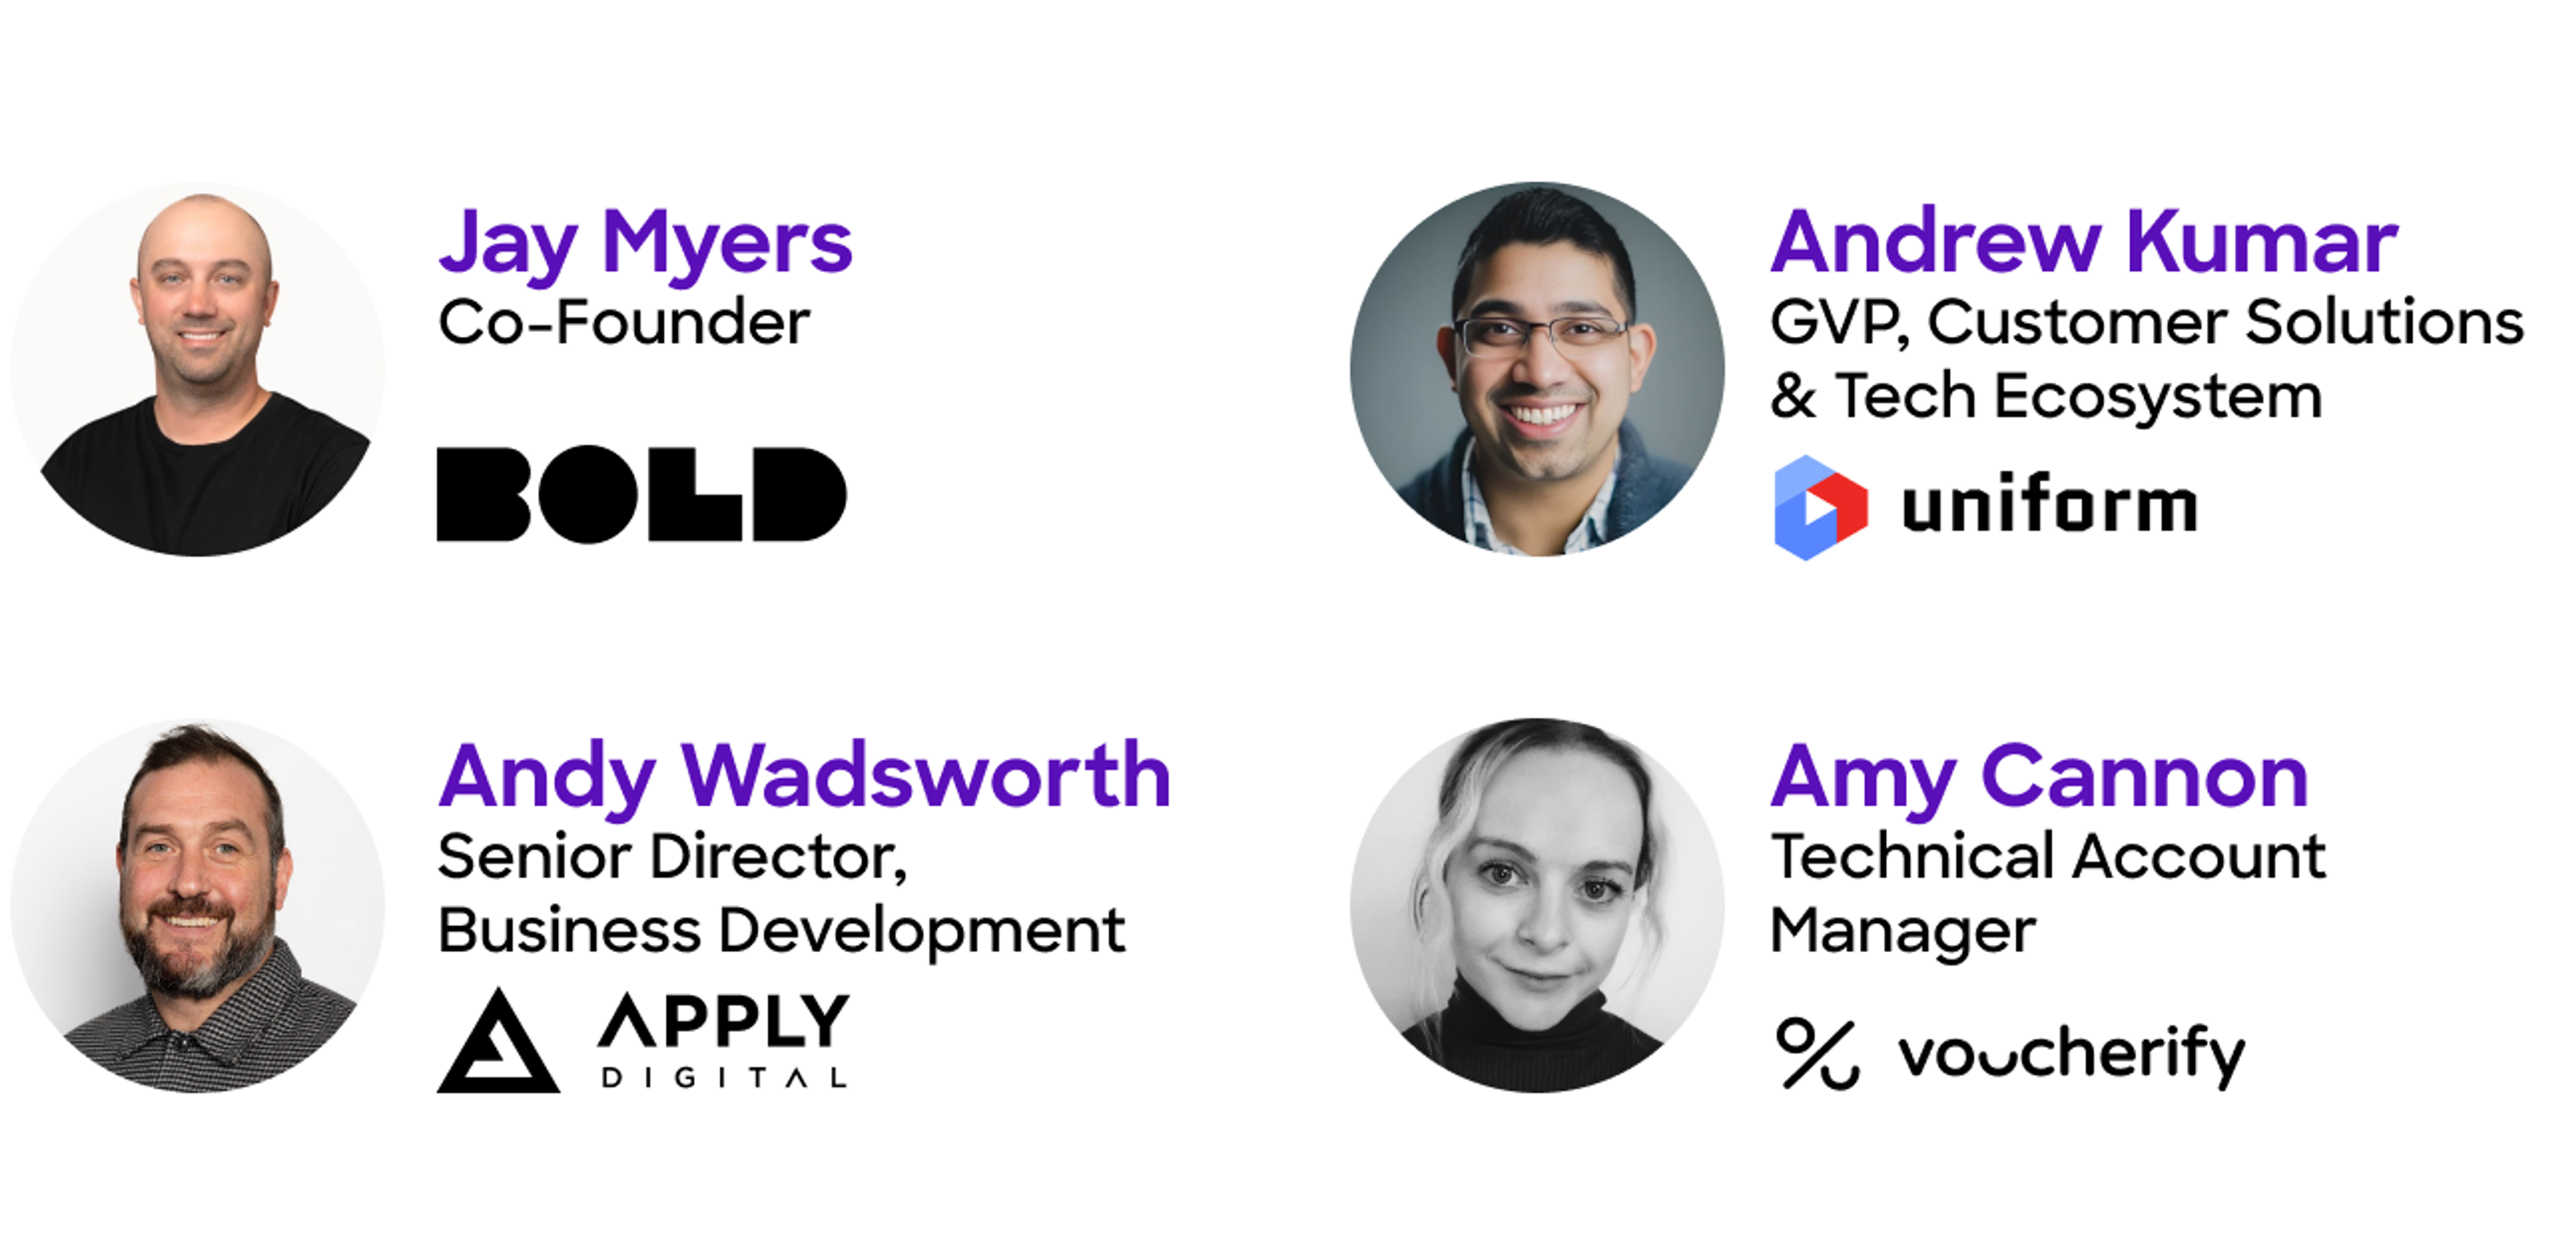 Meet the panel: Jay Myers Co-Founder Bold Commerce, Andy Wadsworth, Senior Director, Business Development, Apply Digital, Andrew Kumar, GVP, Customer Solutions & Tech Ecosystem, Uniform, Amy Cannon, Technical Account Manager, Voucherify.